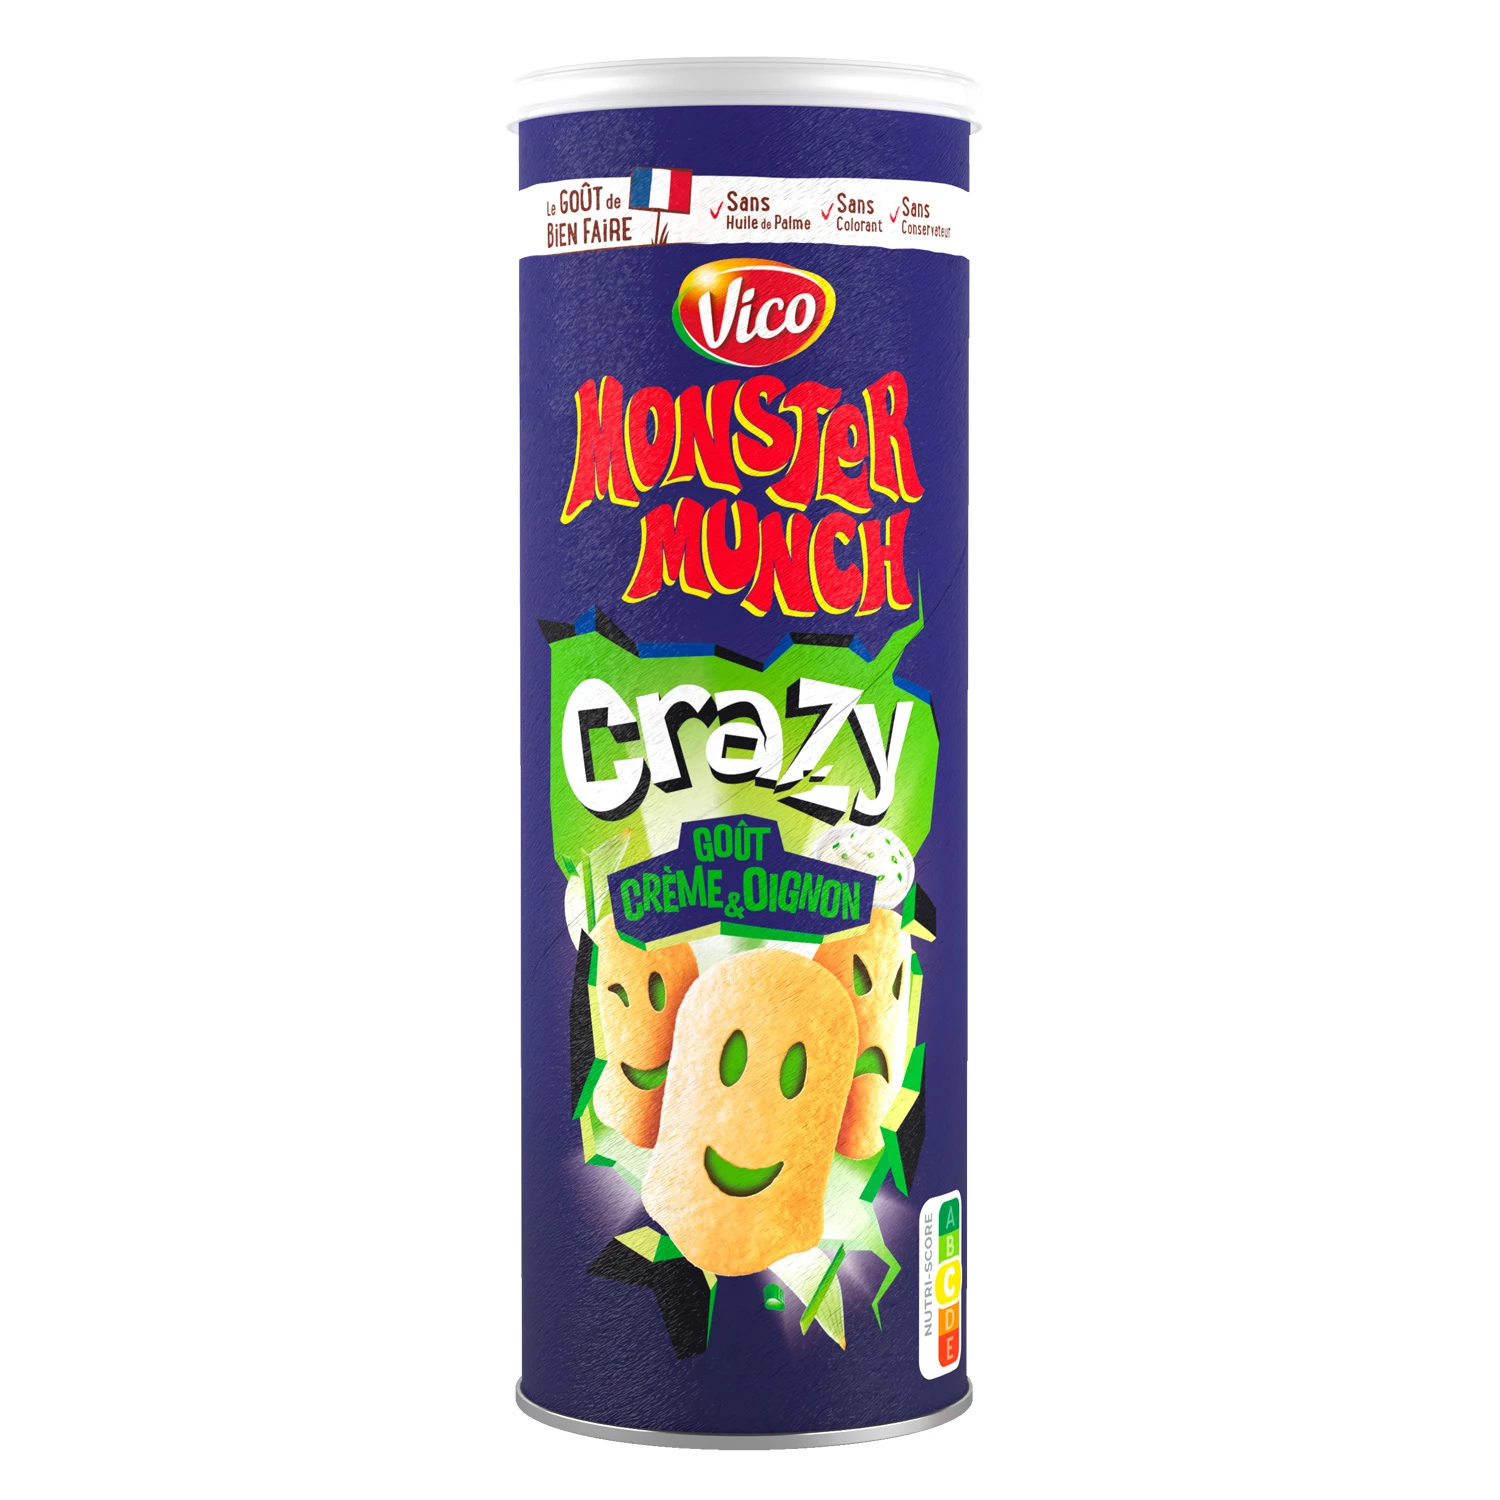 MONSTER MUNCH CRAZY Chips Cream and Onion Flavor, 150g - VICO